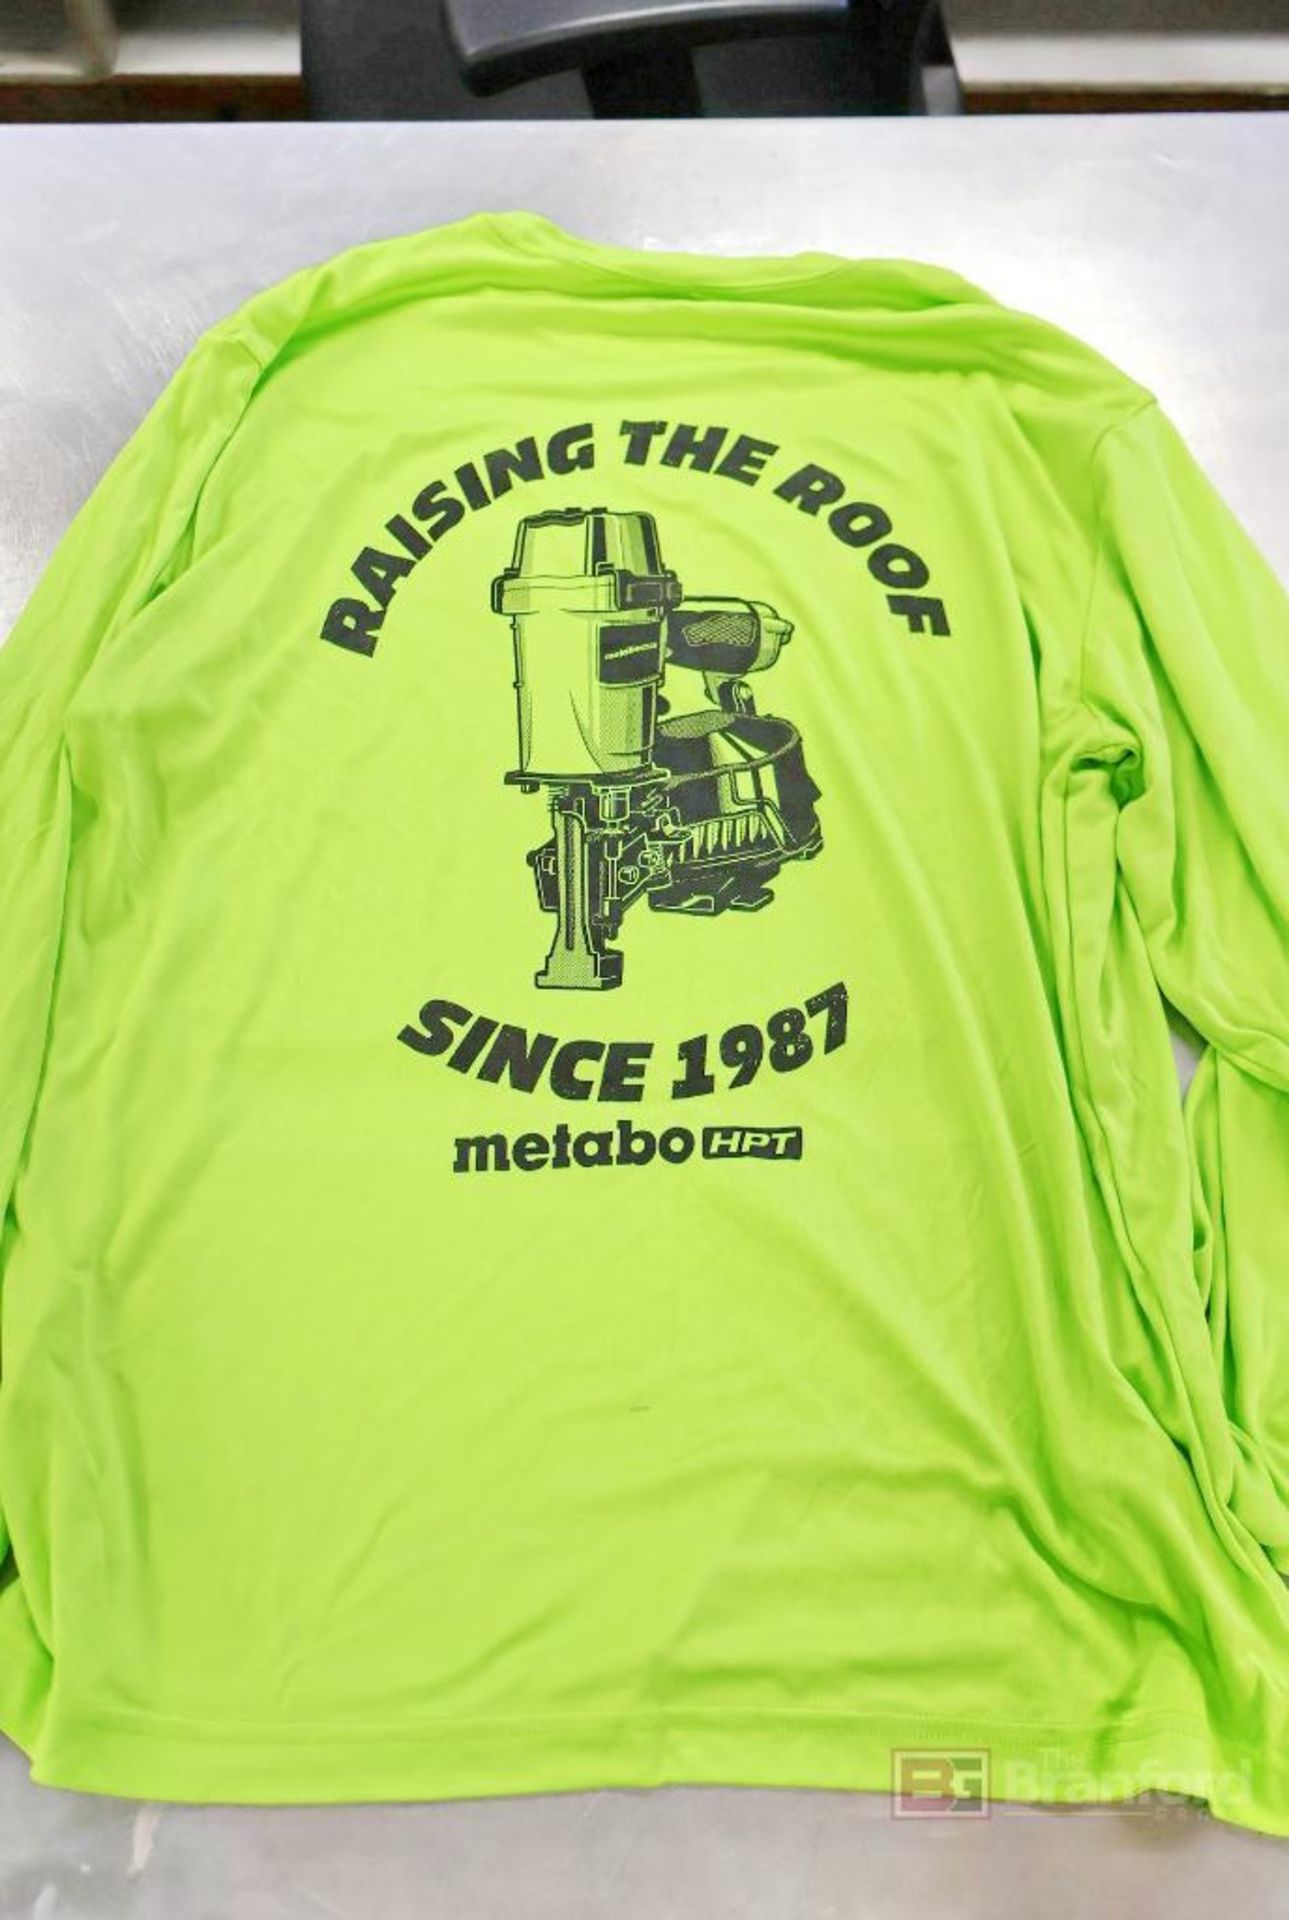 Box Lot of Metabo Raising The Roof T-Shirts - Image 2 of 2